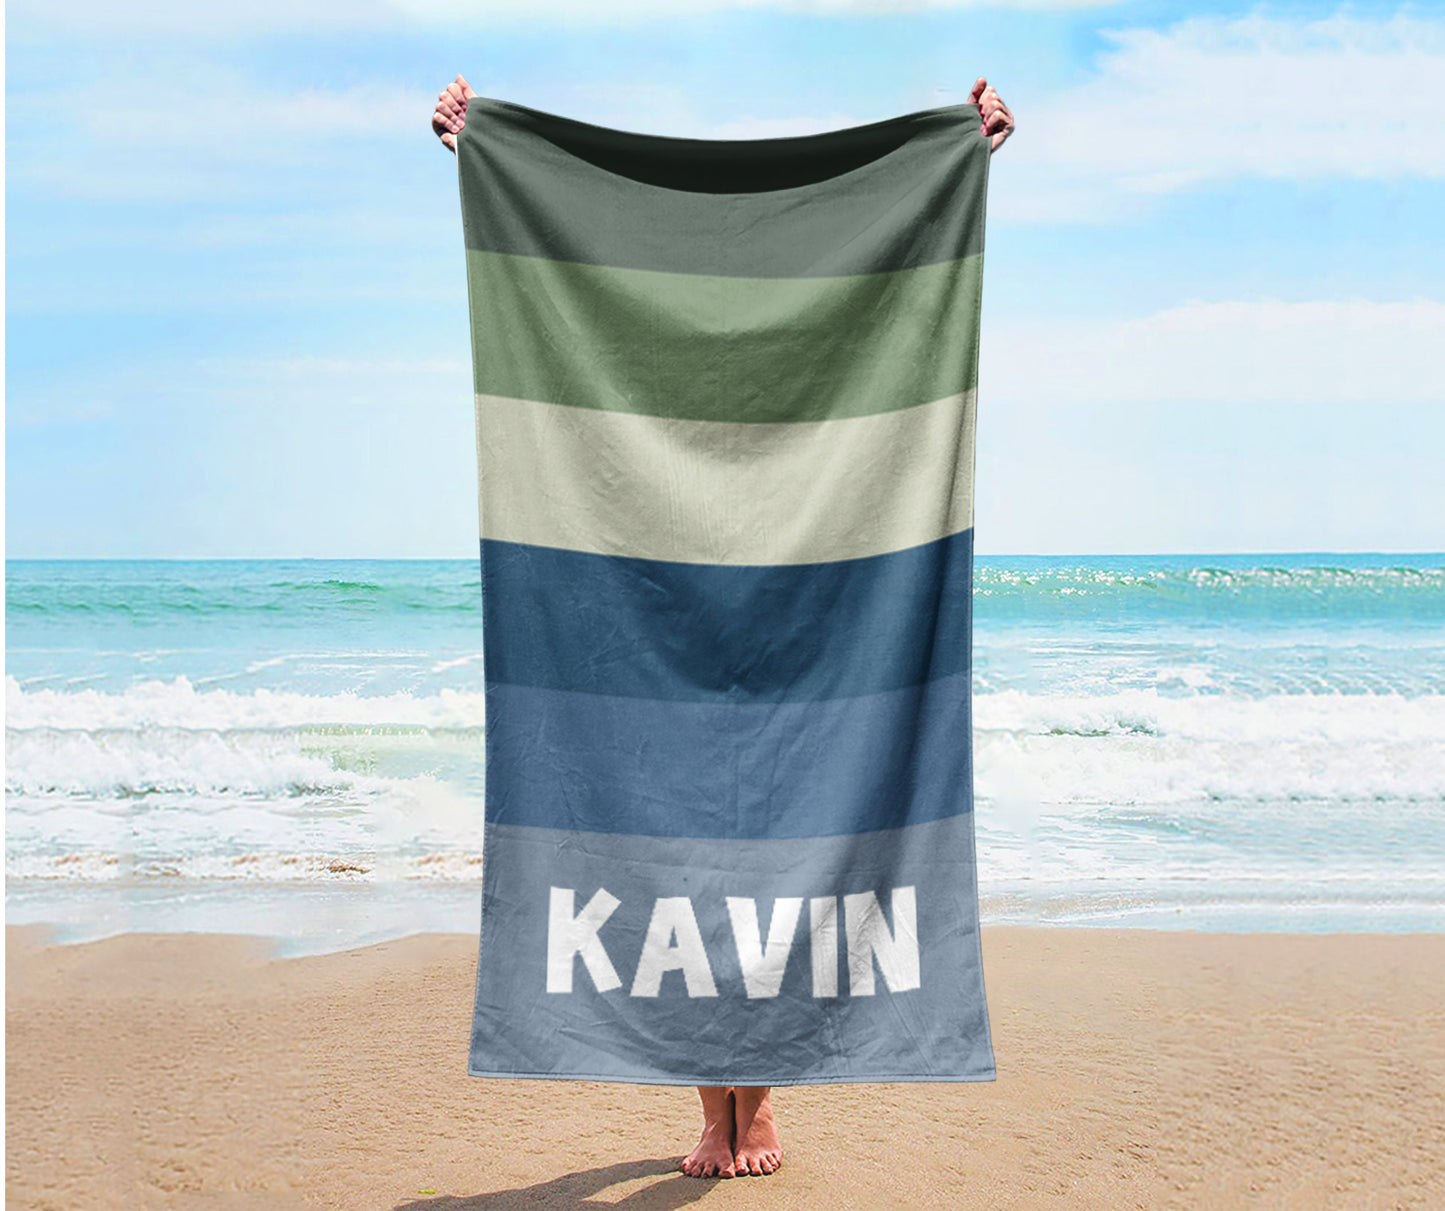 NEW Multi-color design Personalized Beach Towel Name Bath Towel Custom Pool Towel Beach Towel With Name Outside Birthday Vacation Gift